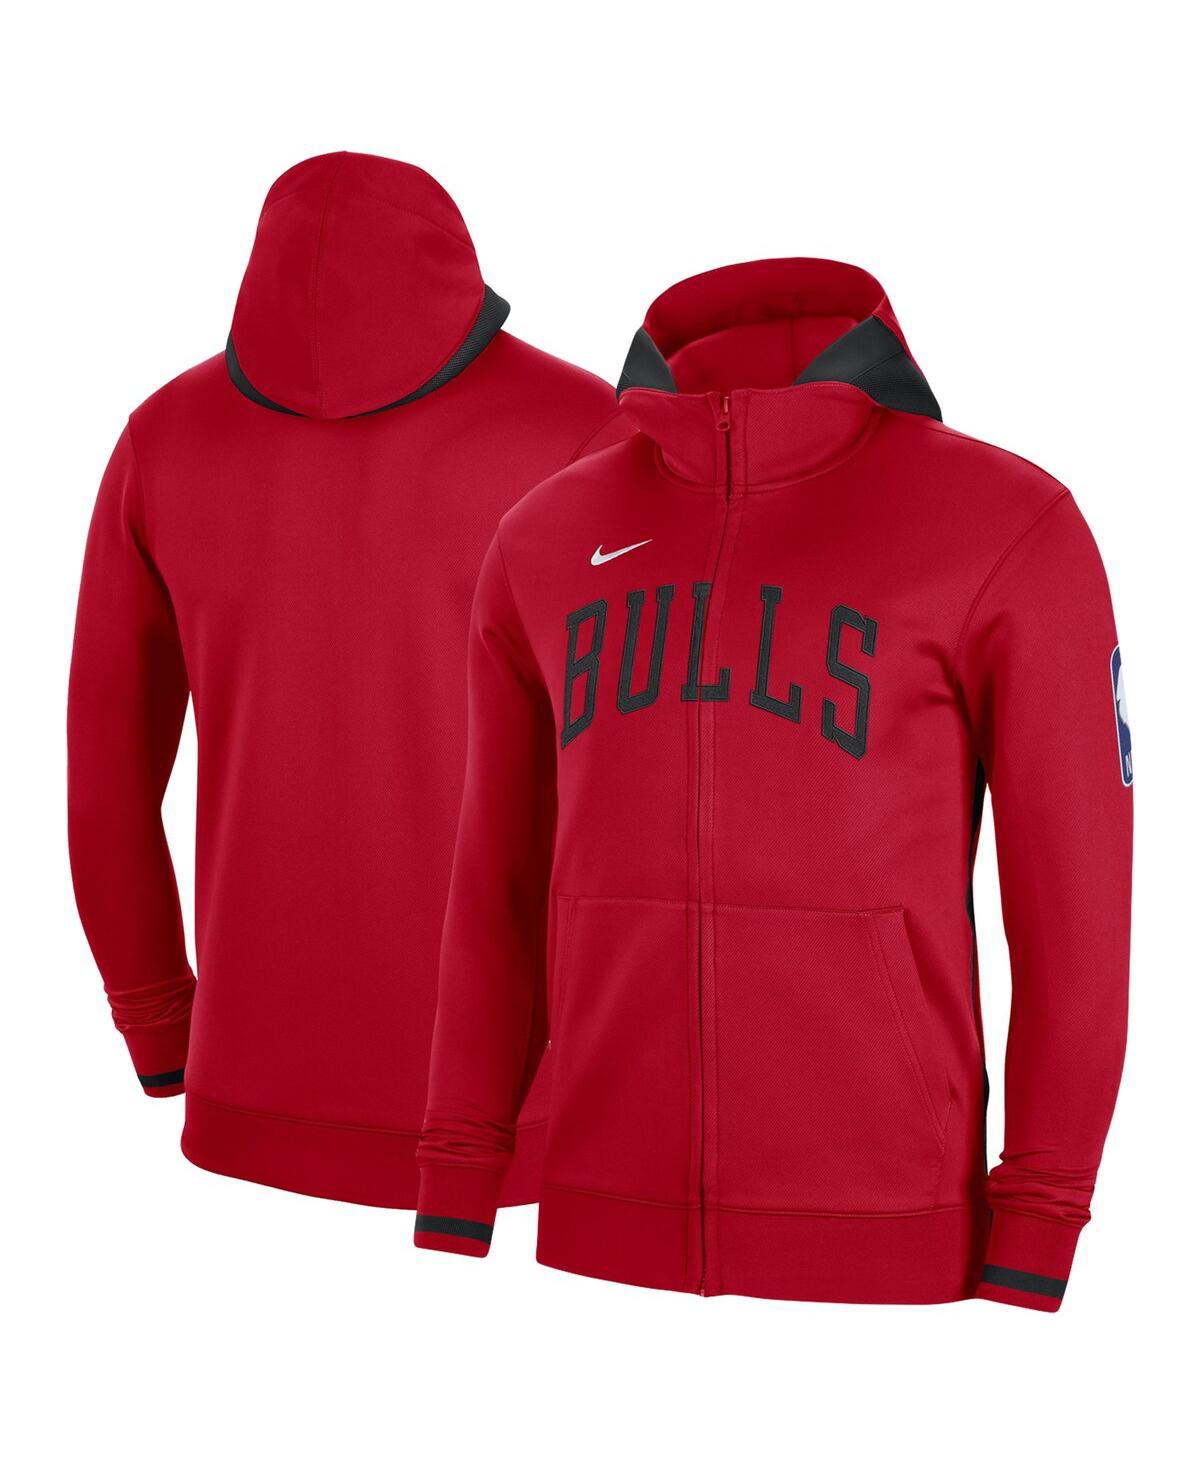 Shop Nike Men's  Red Chicago Bulls Authentic Showtime Performance Full-zip Hoodie